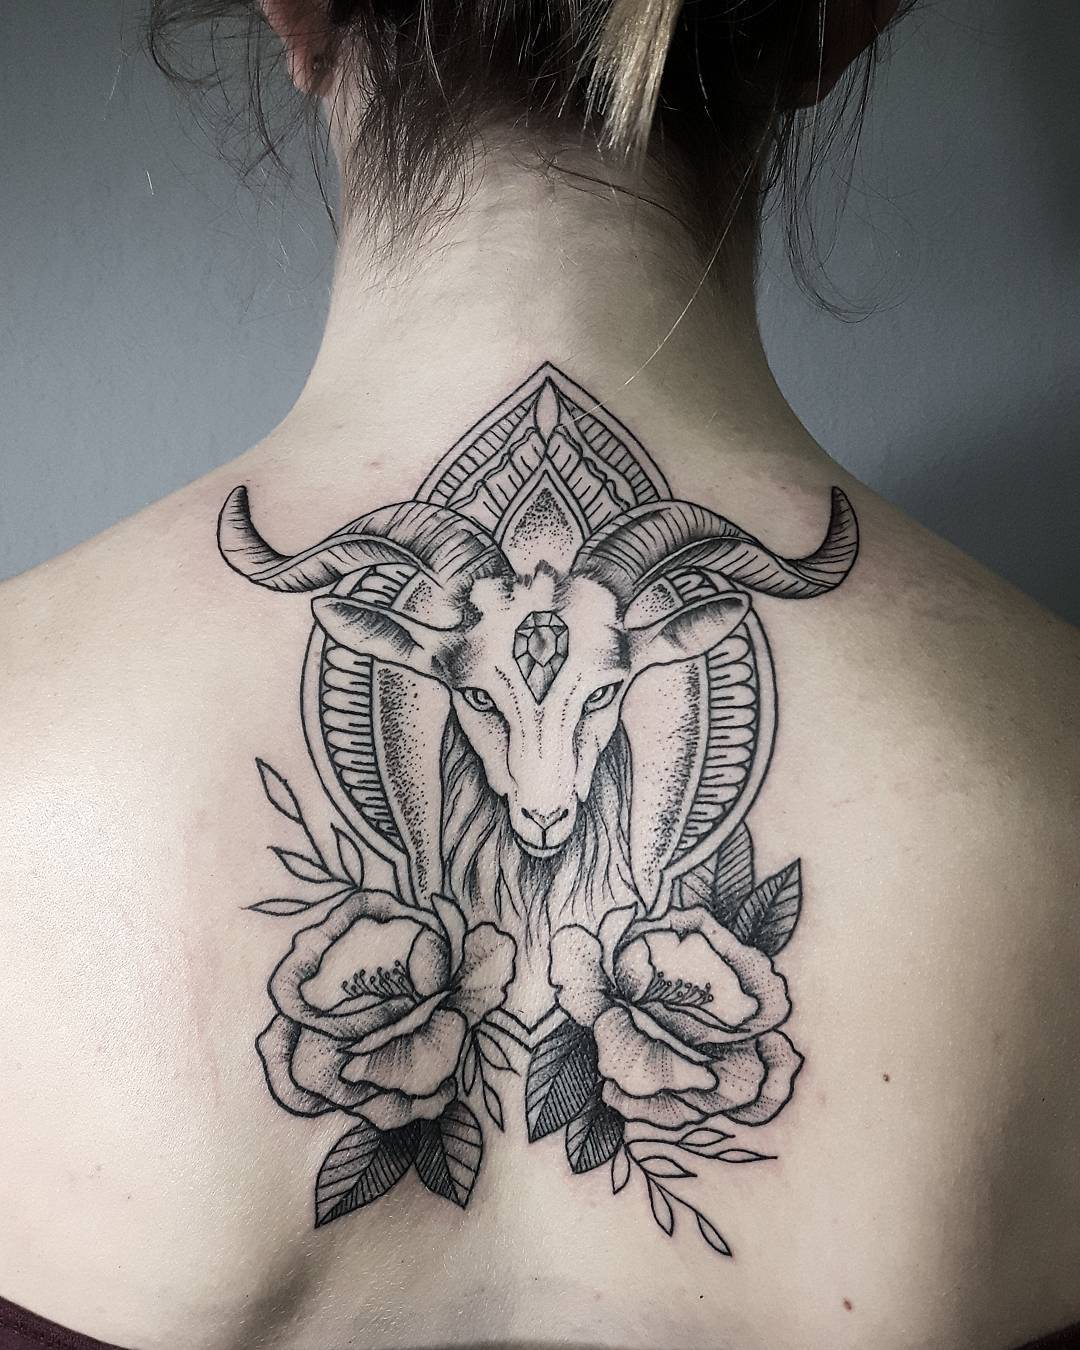 55+ Best Capricorn Tattoo Designs - Main Meaning is... (2019)